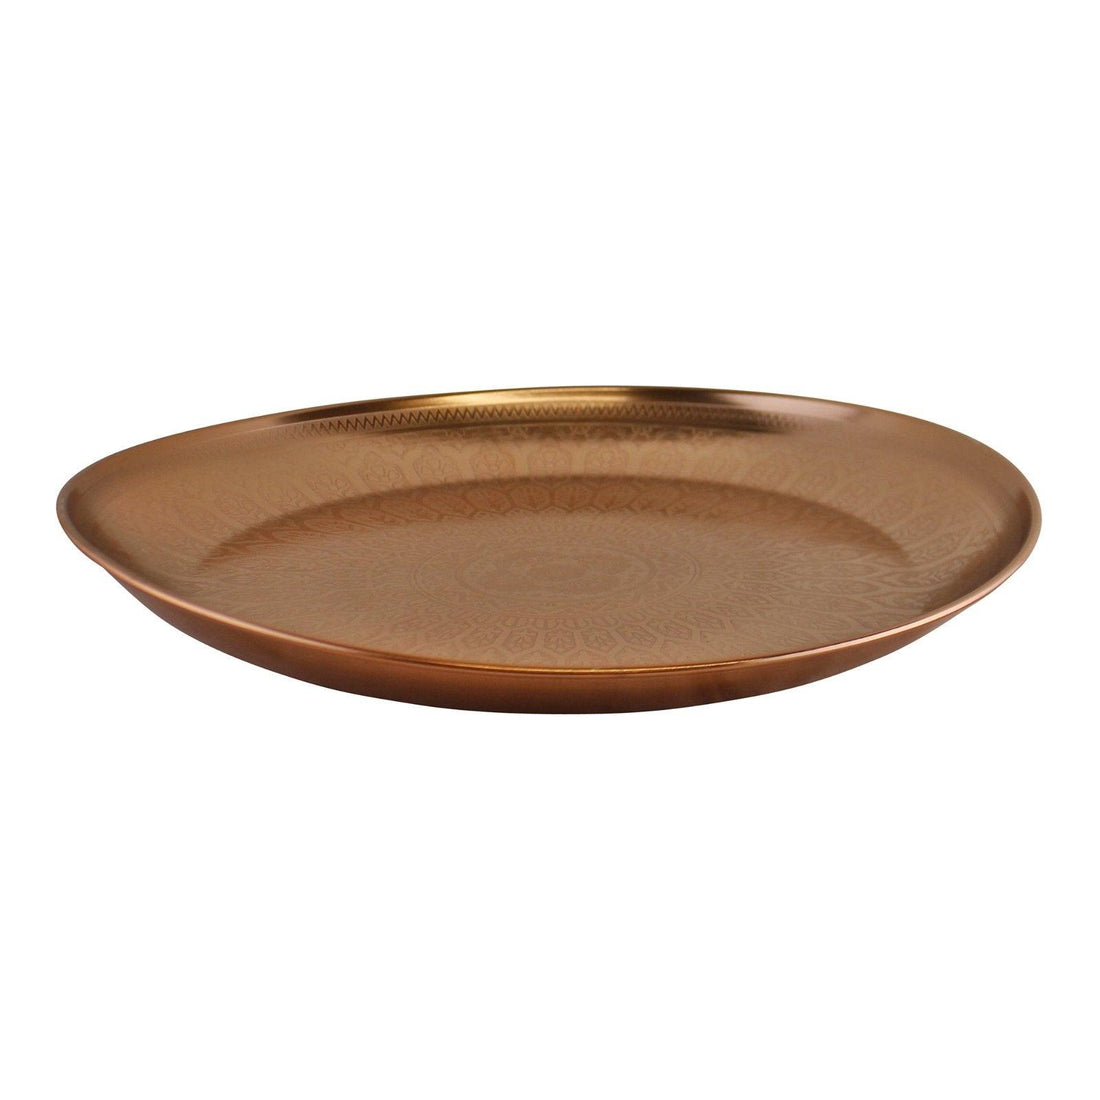 Decorative Copper Metal Tray With Etched Design - £22.99 - Bowls & Plates 